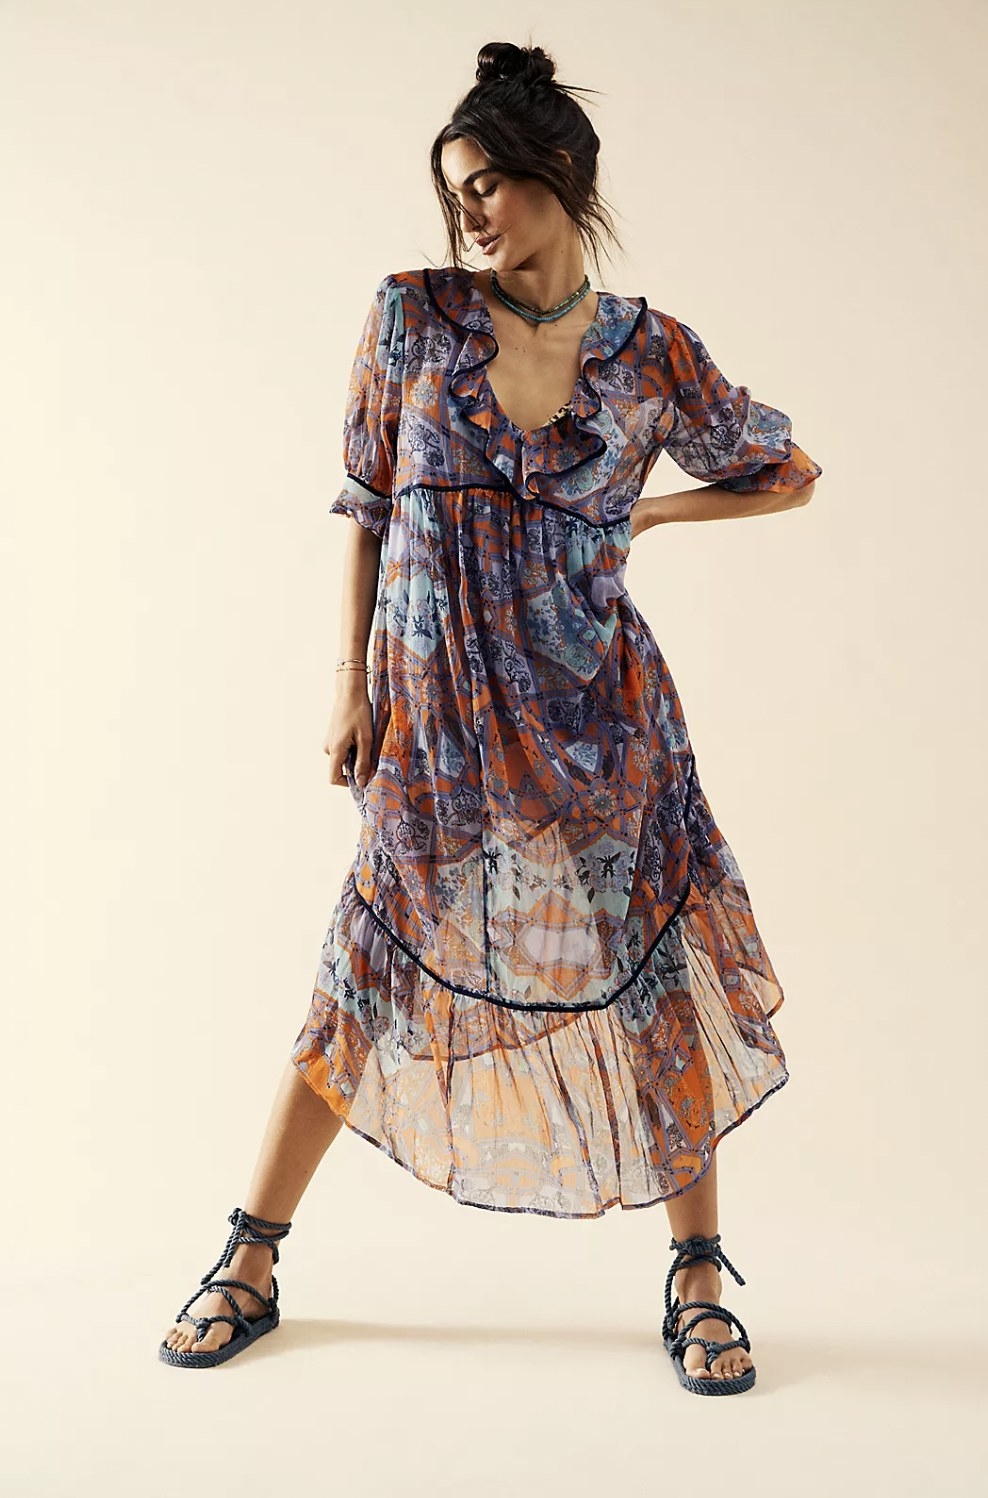 Model in the purple and orange patterned midi dress featuring ruffle v-neck and flowy skirt